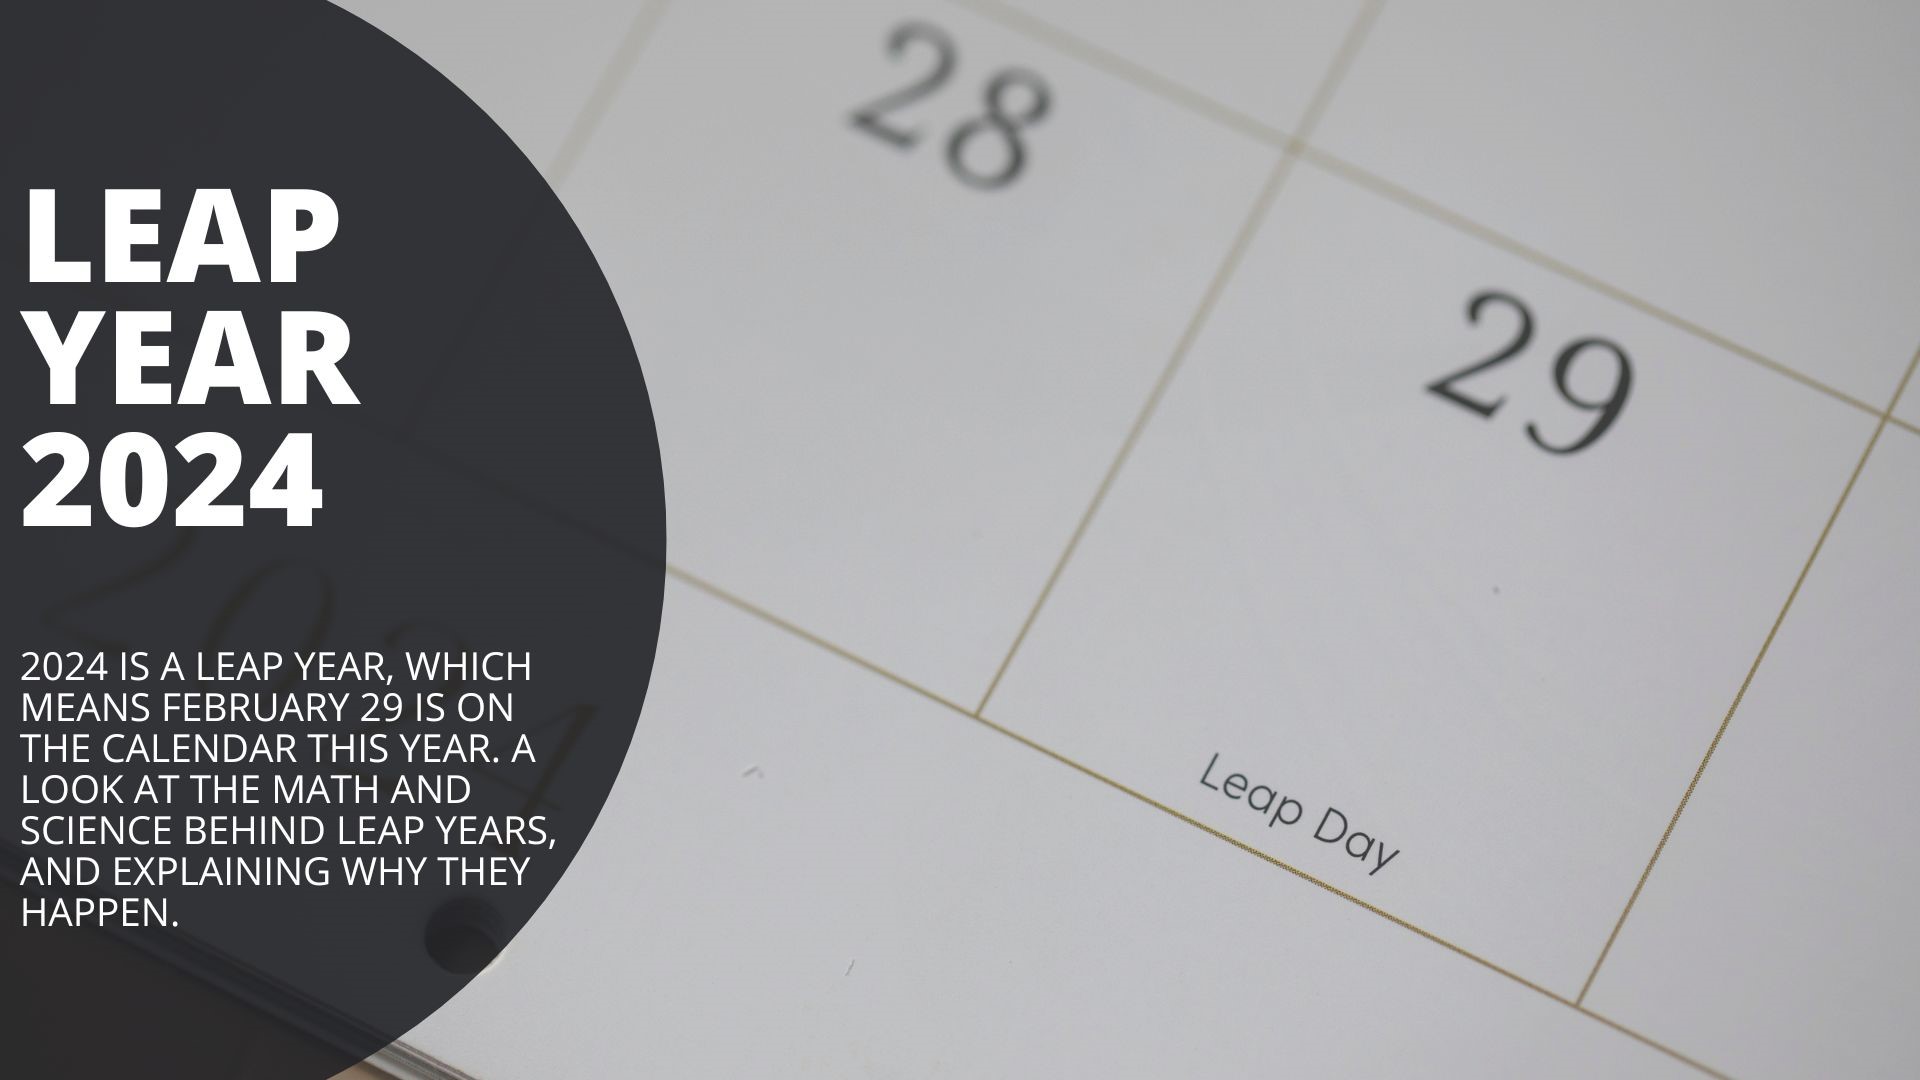 2024 is a leap year, which means February 29 is on the calendar this year. A look at the math and science behind leap years, and explaining why they happen.